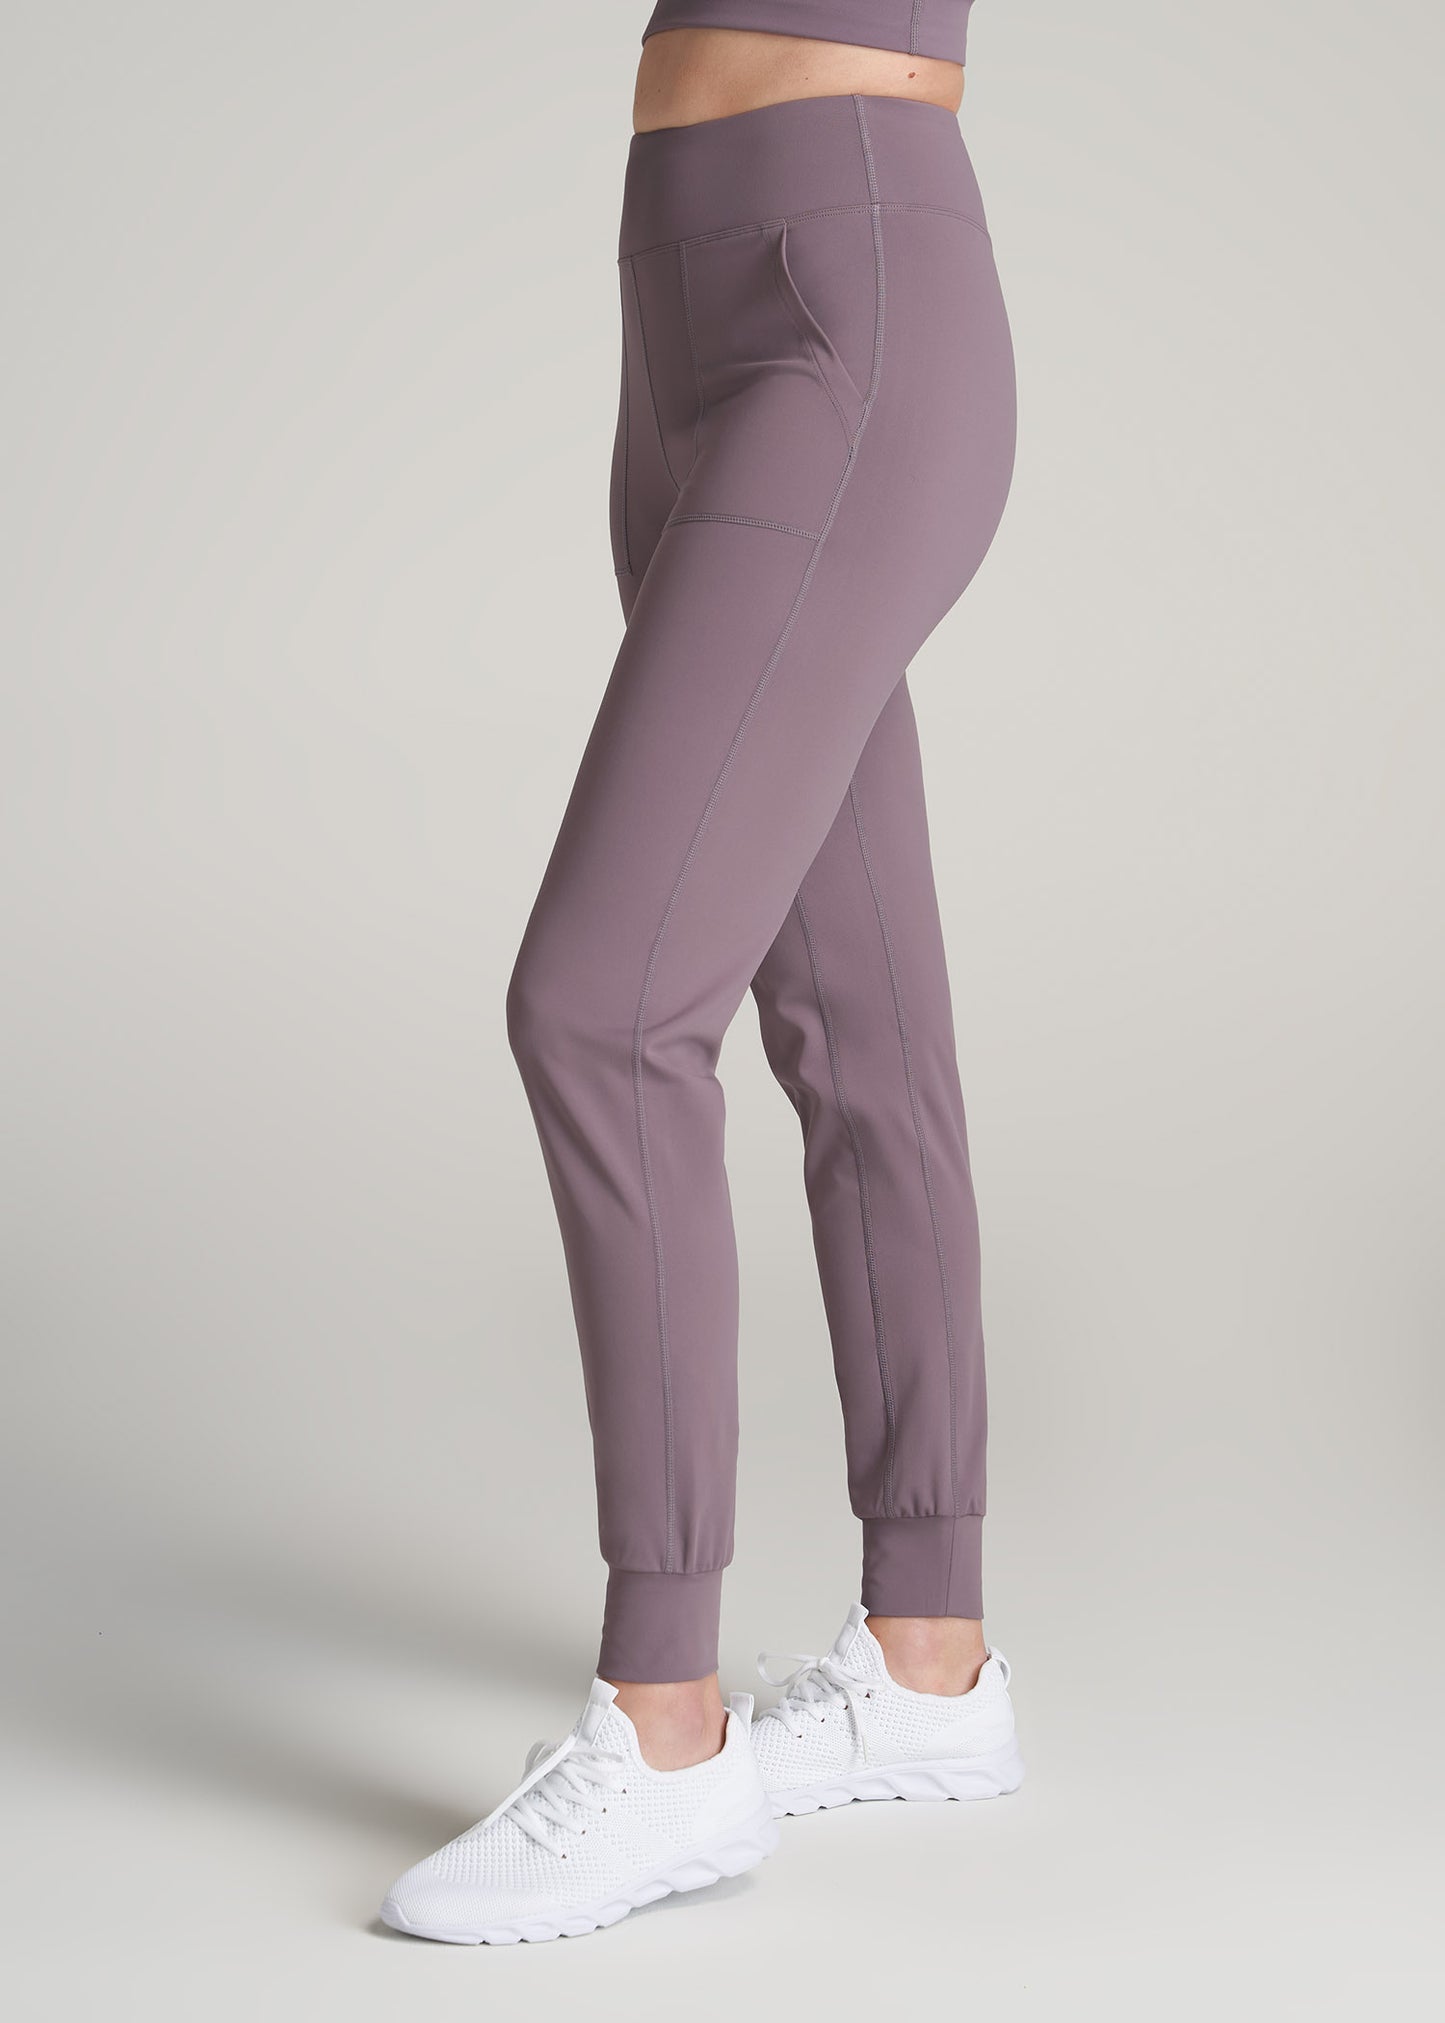 Balance Pocket Joggers for Tall Women in Smoked Mauve